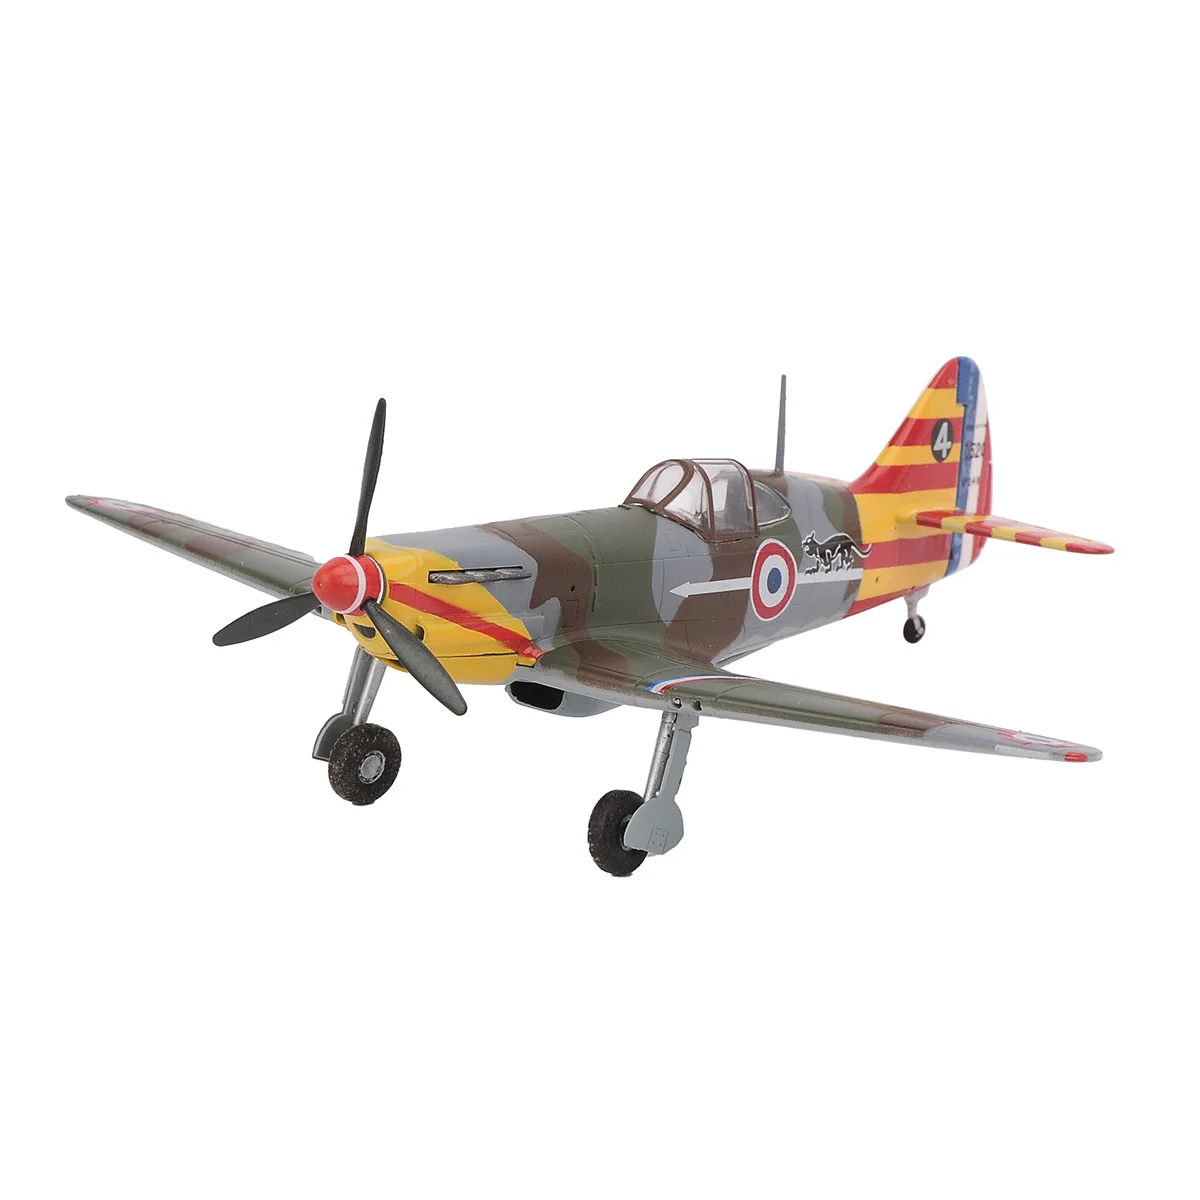 

1/72 MS406 D.520 French Vichy Army No. 248 Plane Desktop Ornaments Kids Toys For Collection